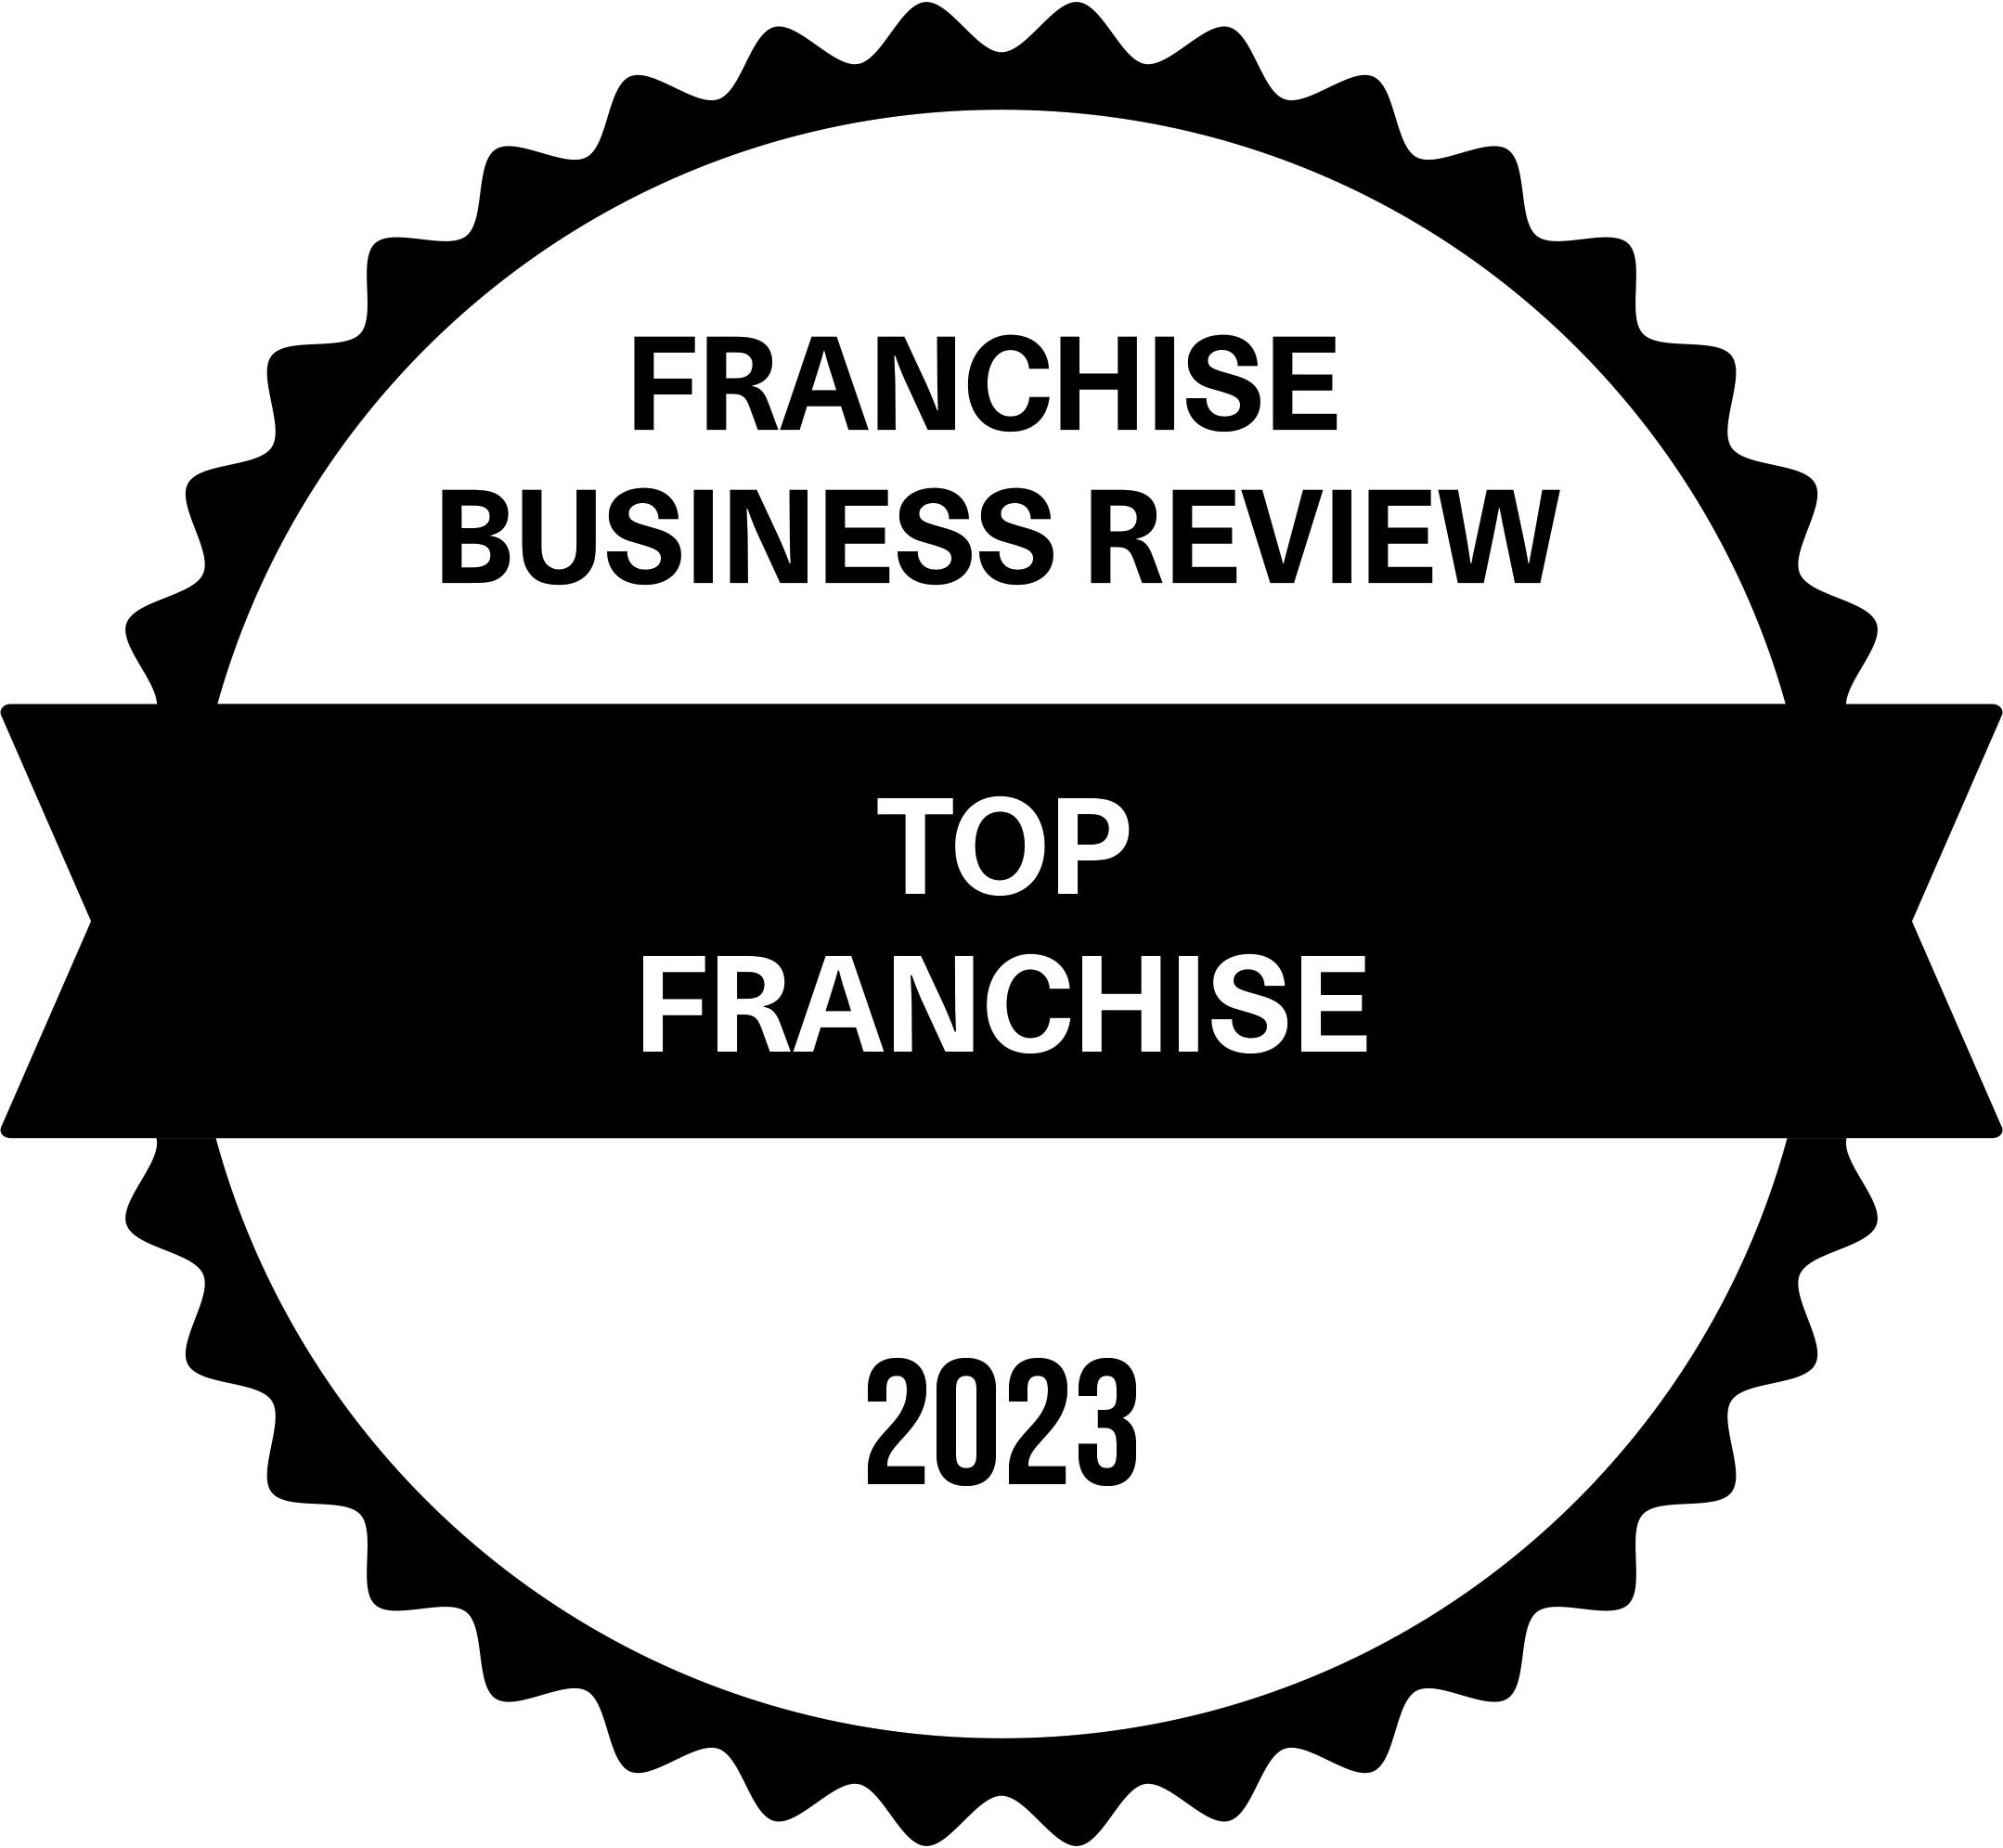 Franchise Business Review Top Franchise 2023 badge